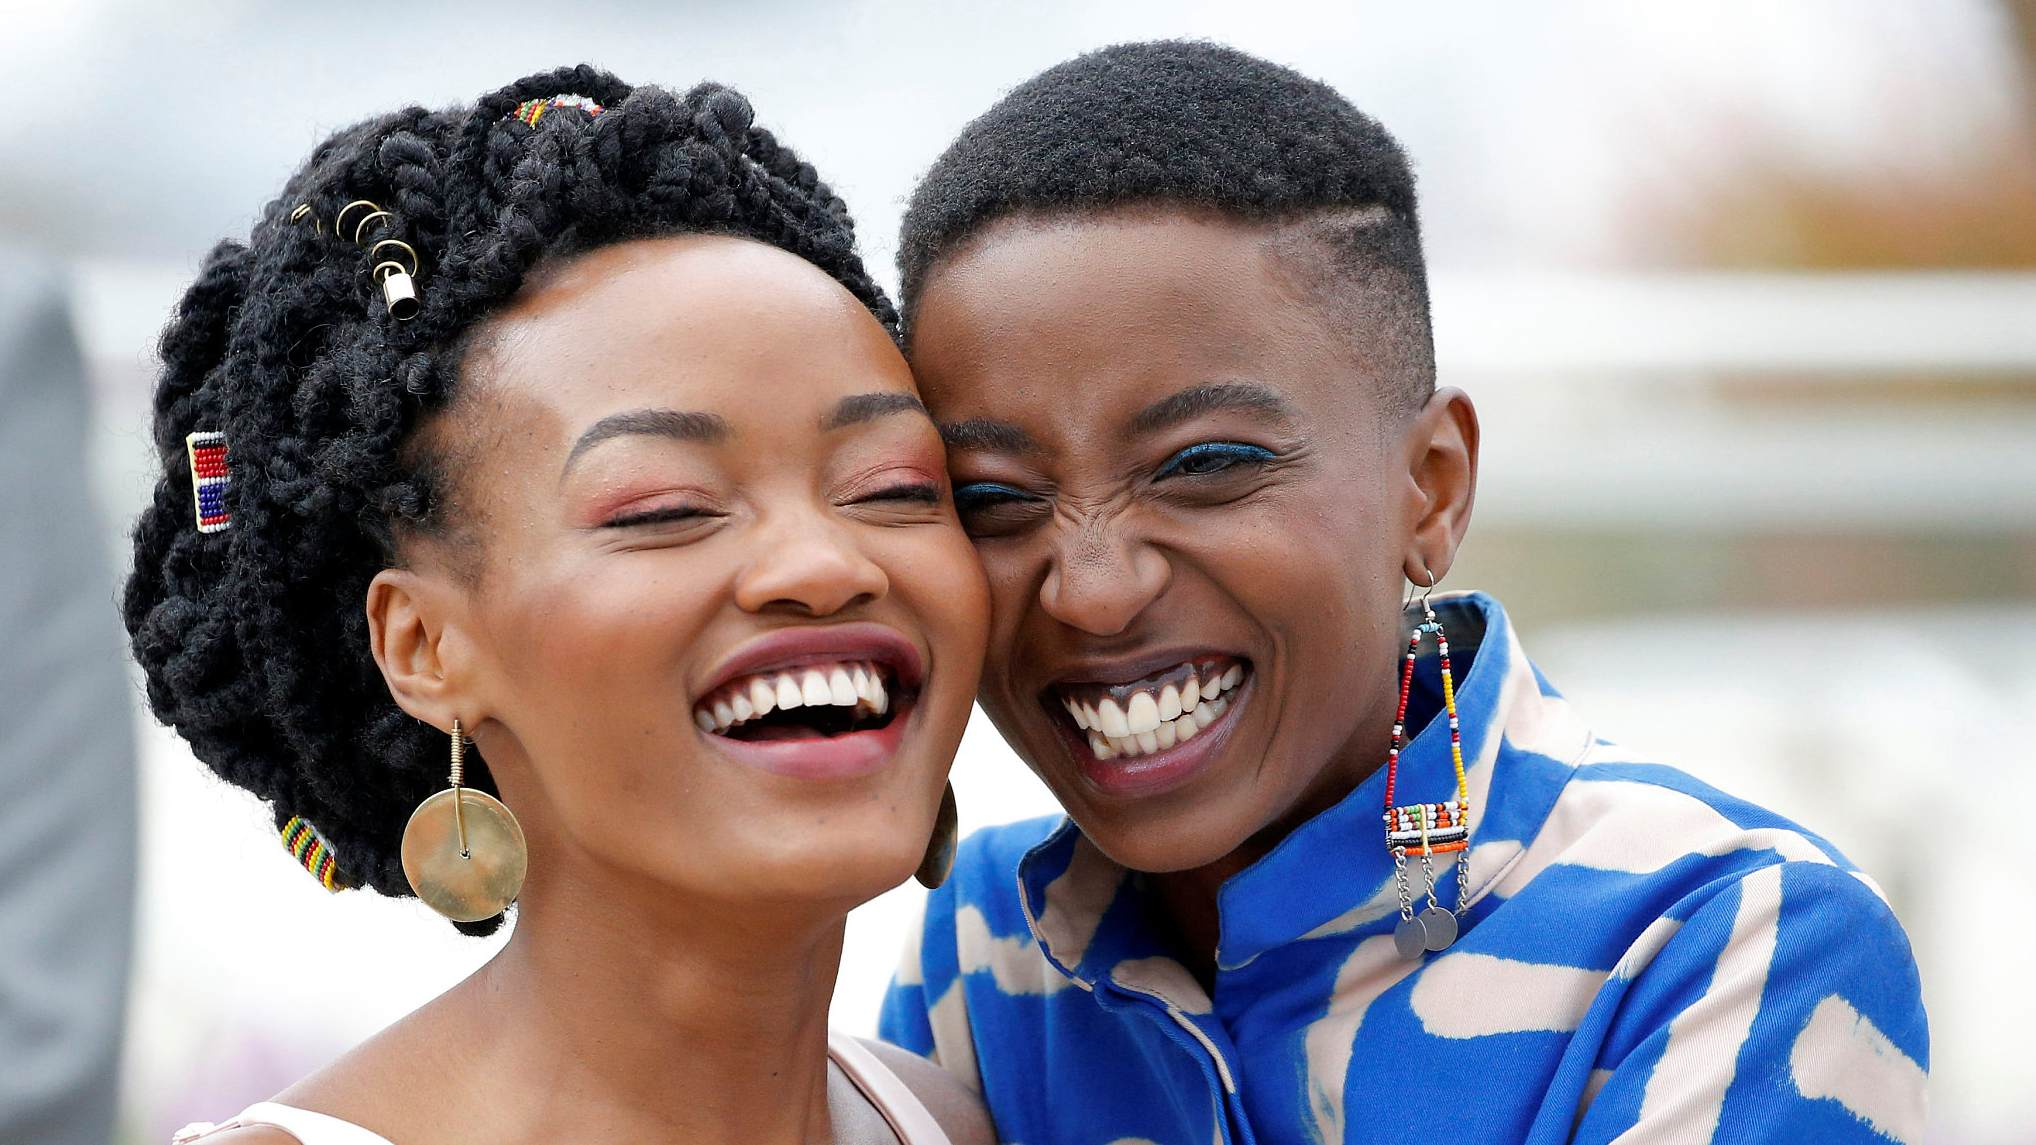 Lesbian Romance Film Shows To Sell Out Crowd In Nairobi After Court